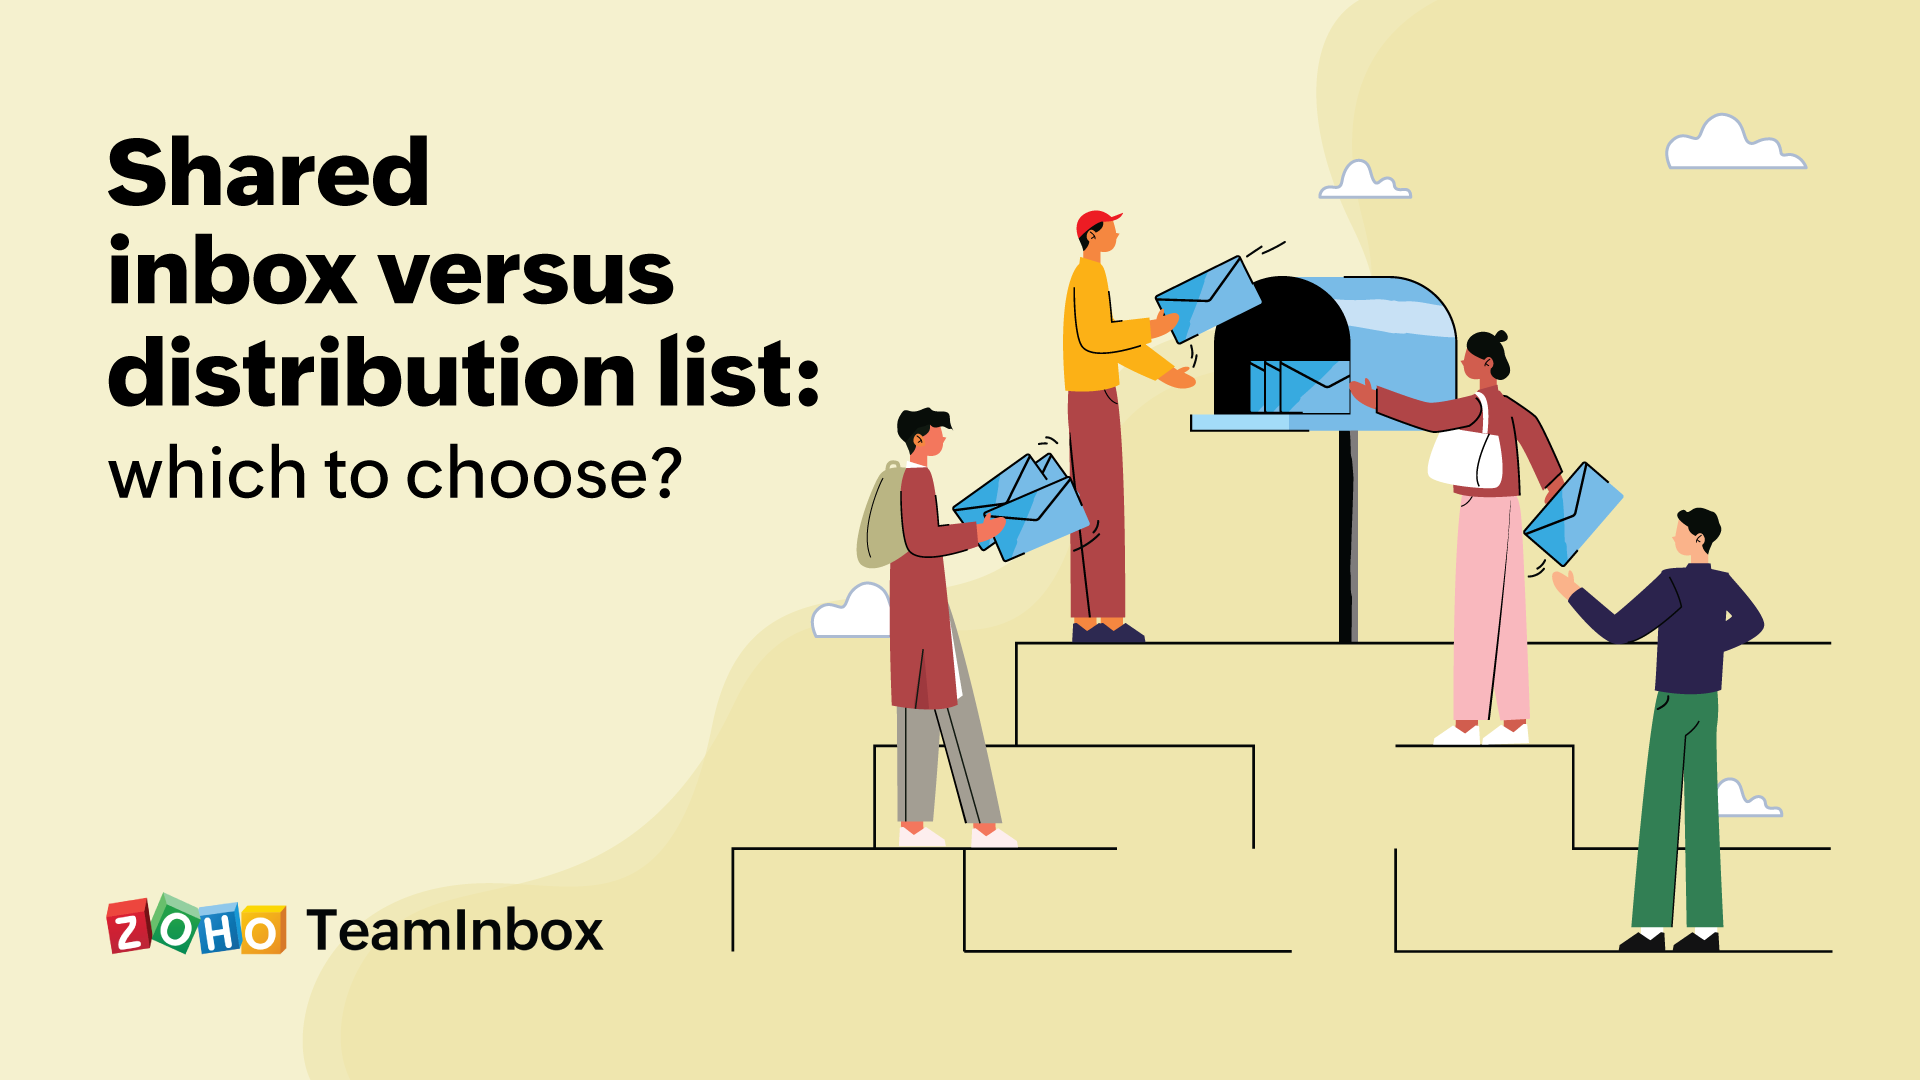 Shared inbox versus distribution list: which to choose?